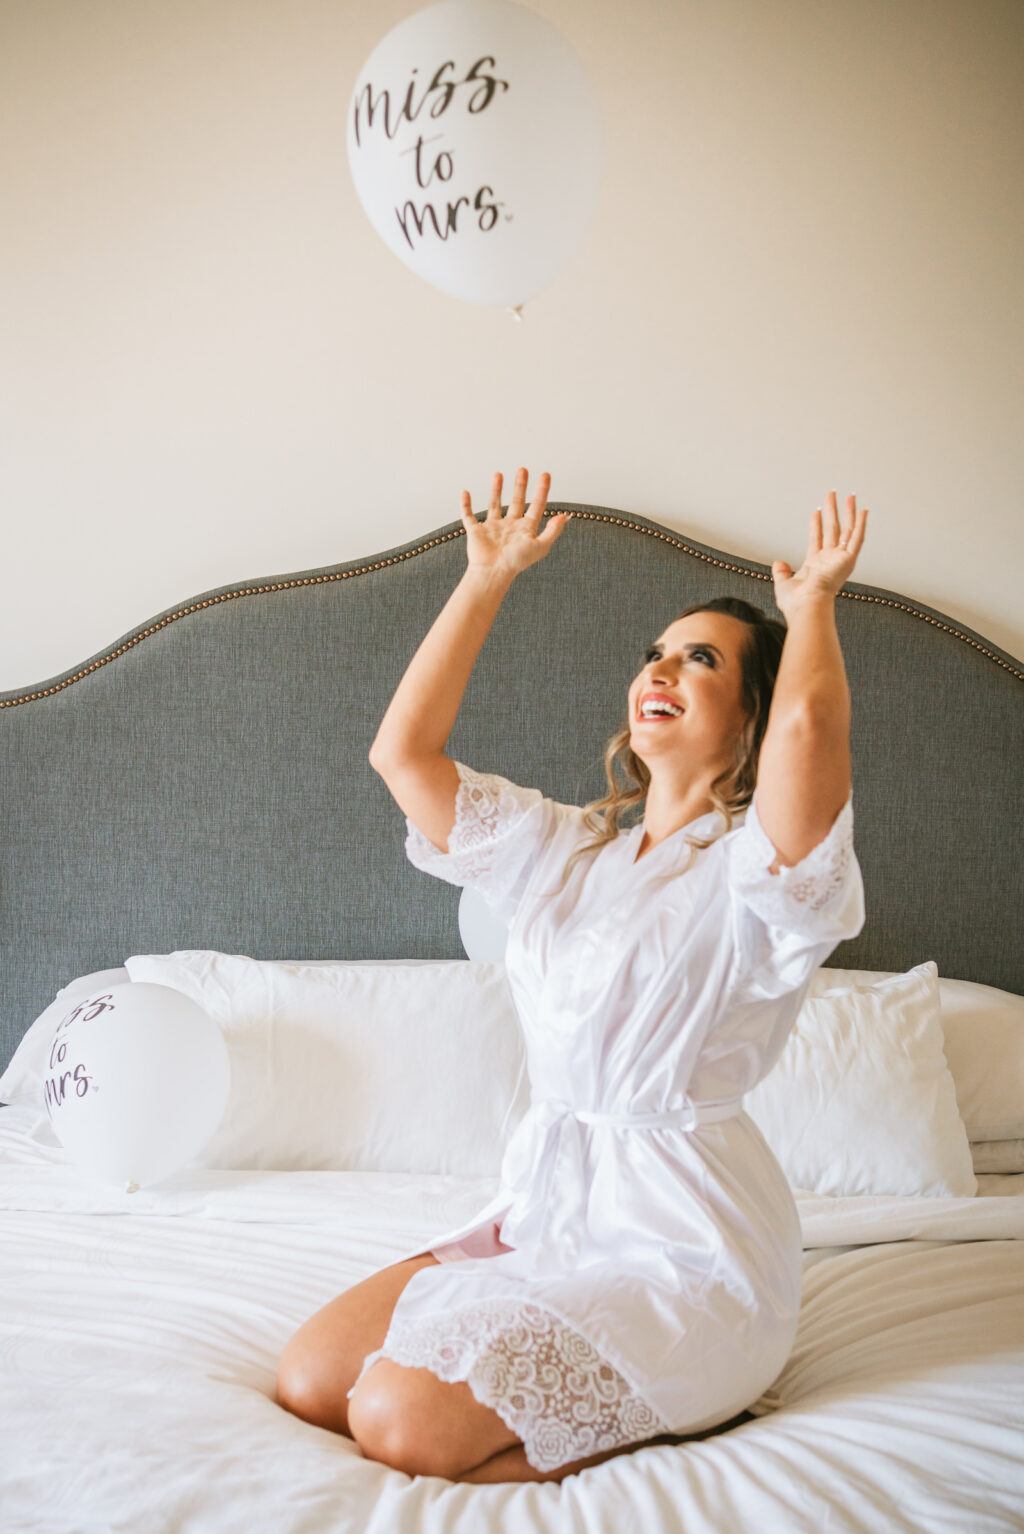 Florida bride on hotel bed getting wedding ready in lace trim white robe playing with miss to mrs balloon | Tampa wedding photographer Bonnie Newman Creative | Wedding hair and makeup Femme Akoi Beauty